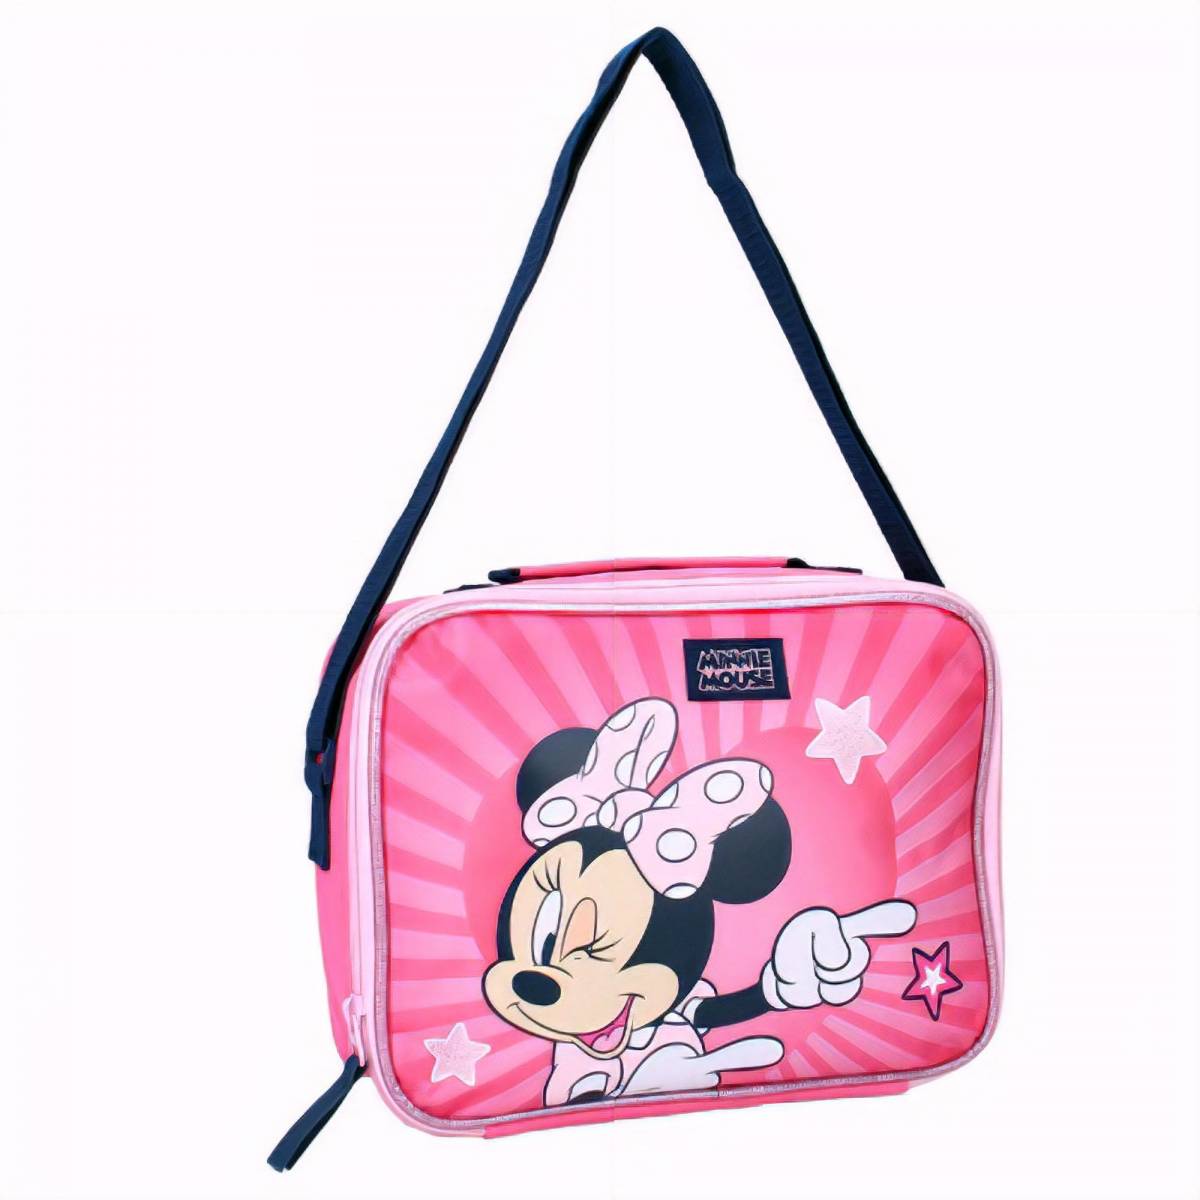 Minnie and Mickey Mouse Lunch Box | Lunchbox.com